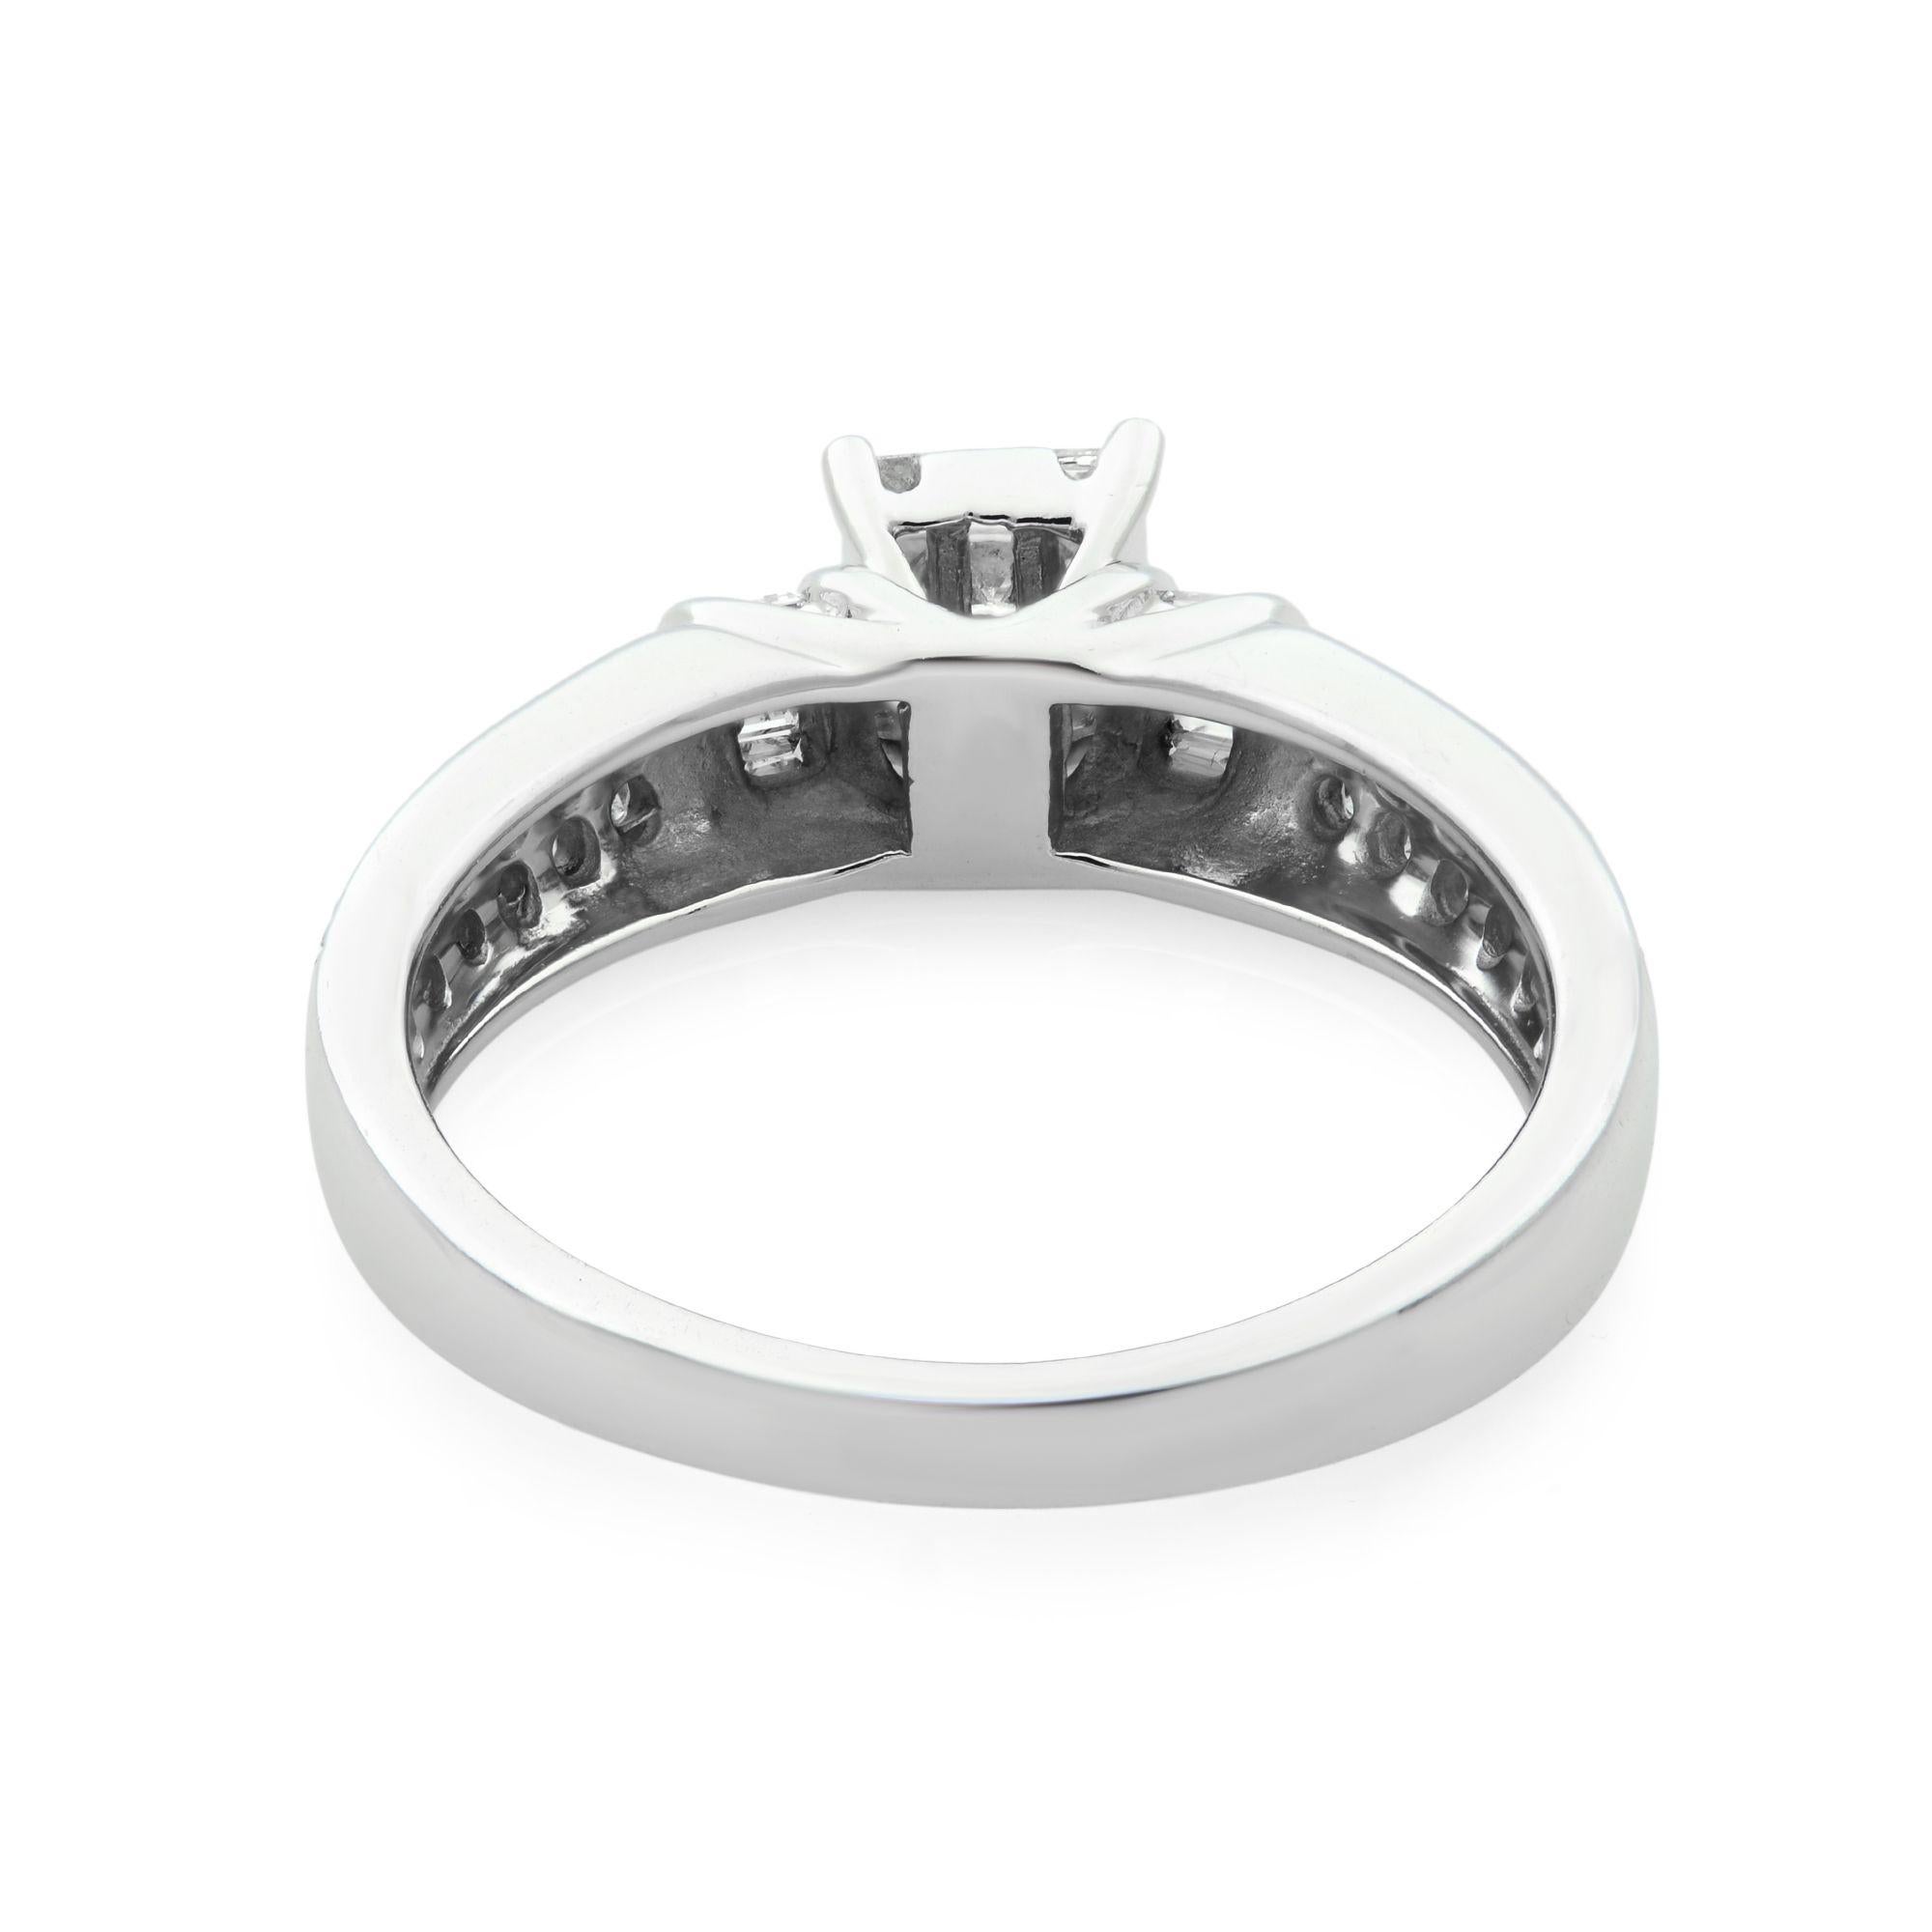 Rachel Koen Diamond Engagement Ring 14K White Gold 0.55cttw In New Condition For Sale In New York, NY